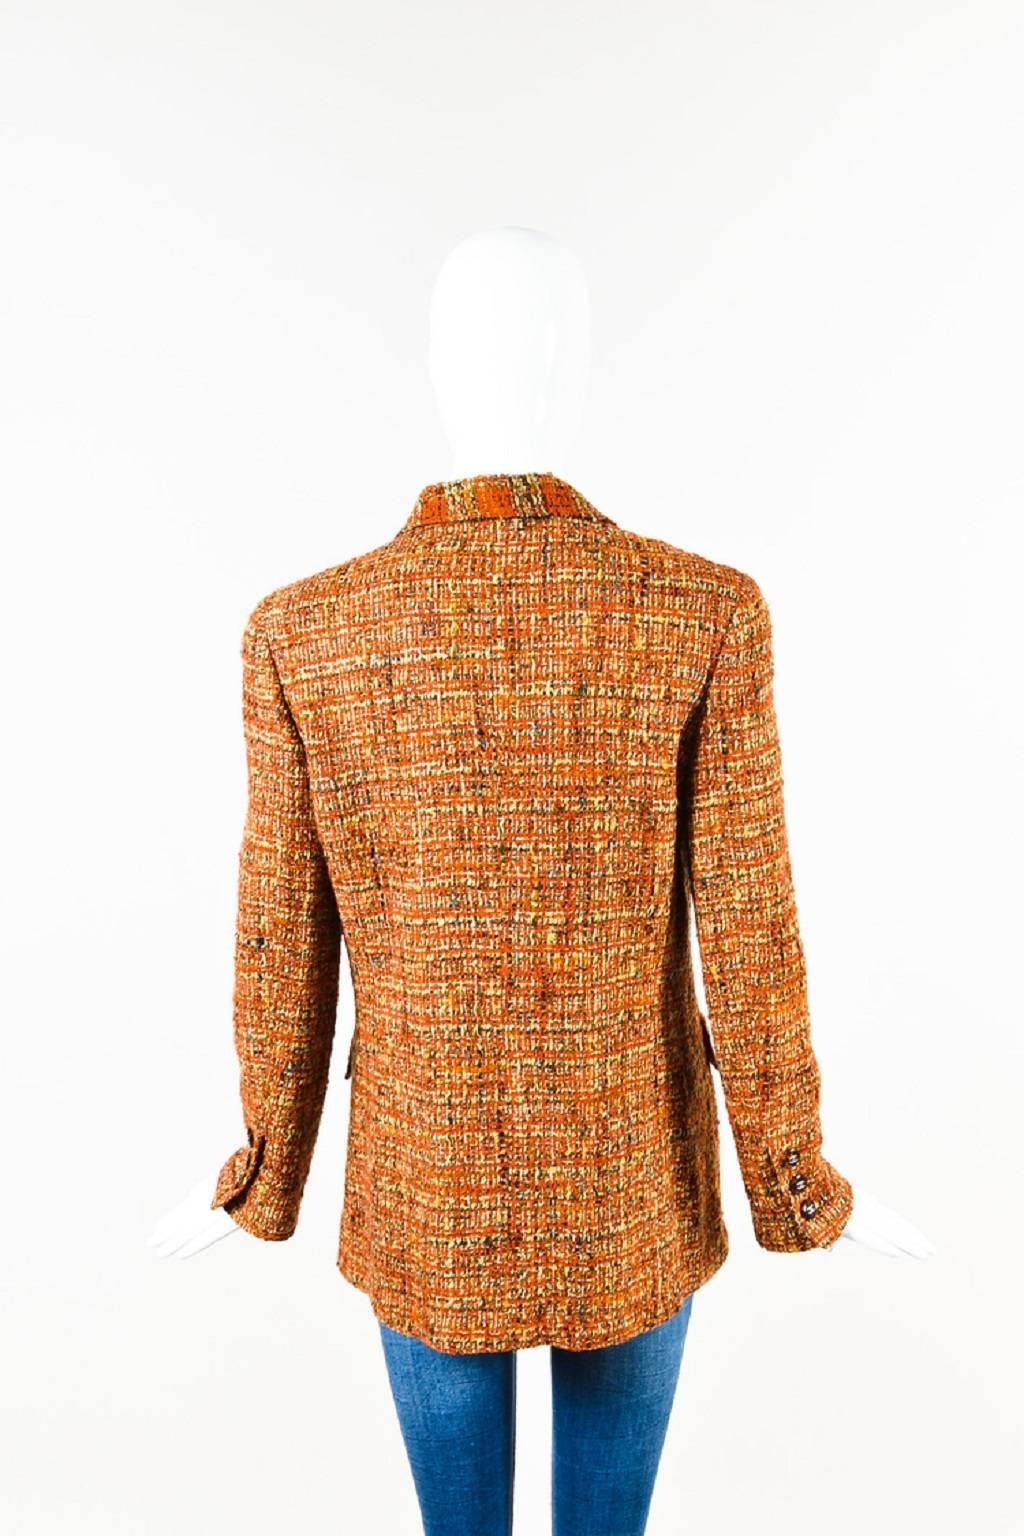 Size: 42
Color: Burnt Orange, Beige, Multicolor
Made In: France
Fabric Content: Exterior: Wool, Acrylic; Lining: Silk

Item Specifics & Details: Features a multicolored tweed construction, a notched lapel, transparent 'CC' buttons at the front and